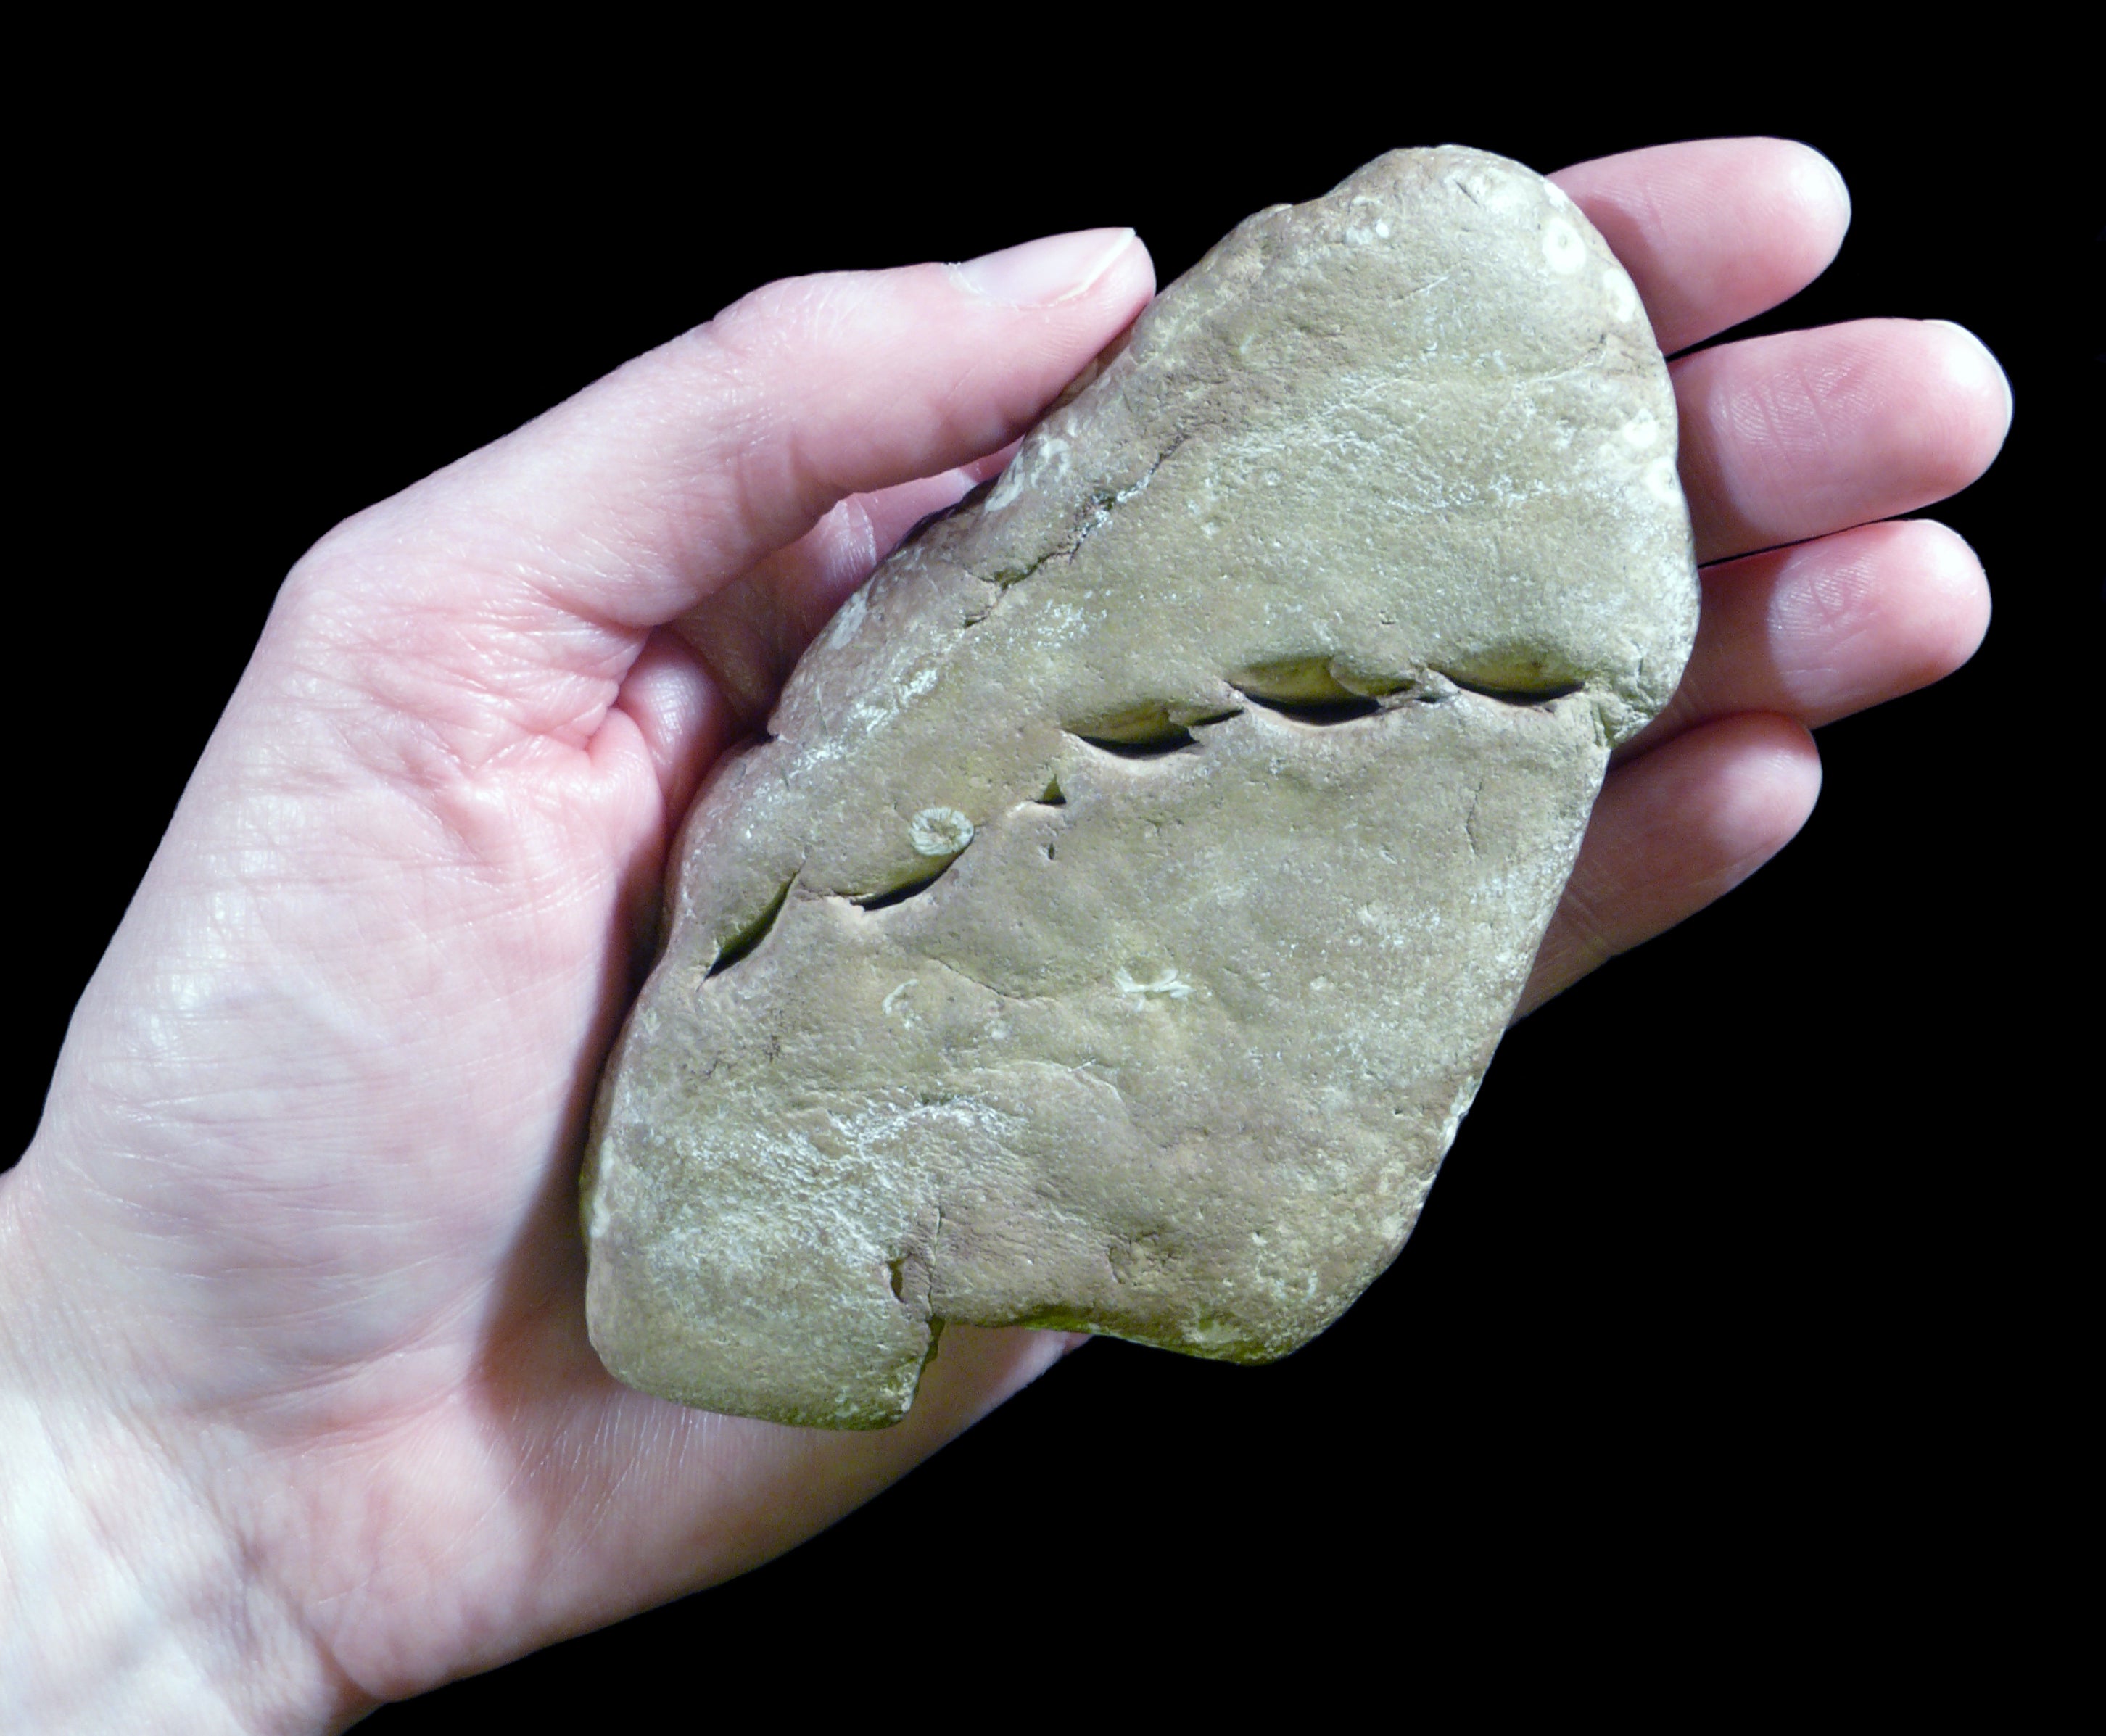 A coprolite with bite marks (Photo: S. Godfrey, Courtesy of the Calvert Marine Museum)